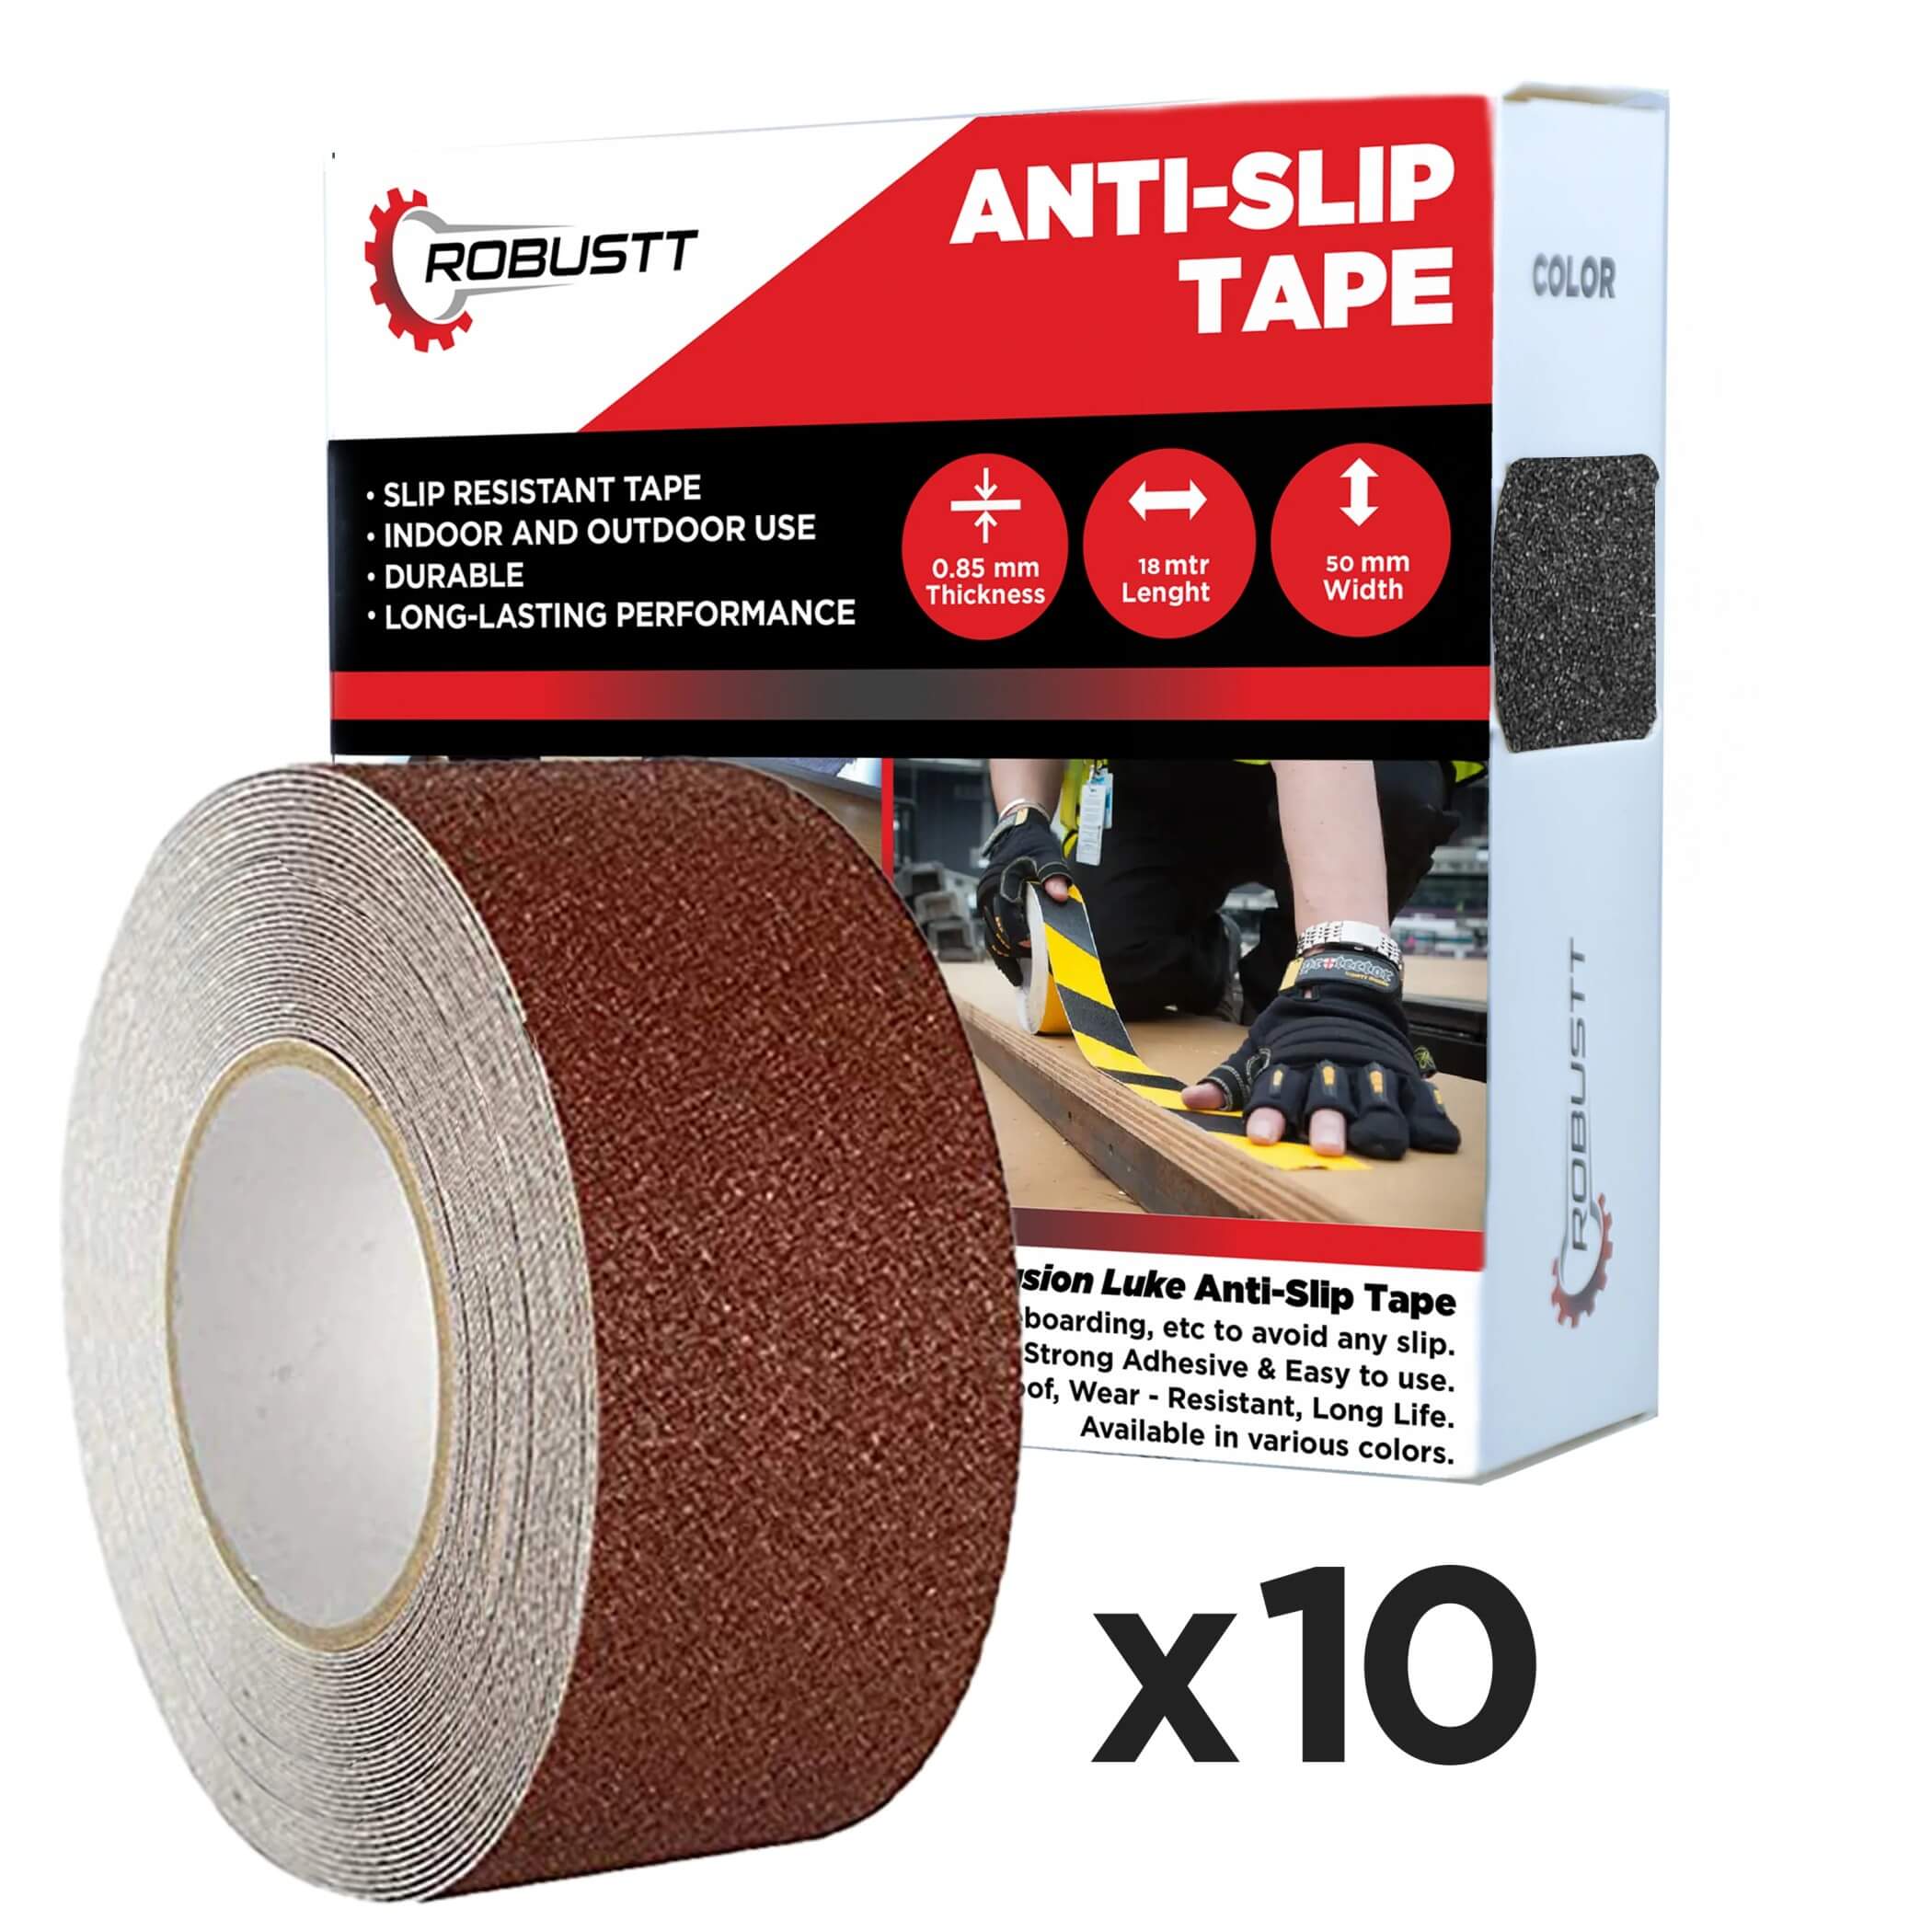 robustt-anti-skid-antislip-18mtr-guaranteed-x50mm-brown-fall-resistant-with-pet-material-and-solvent-acrylic-adhesive-tape-pack-of-10